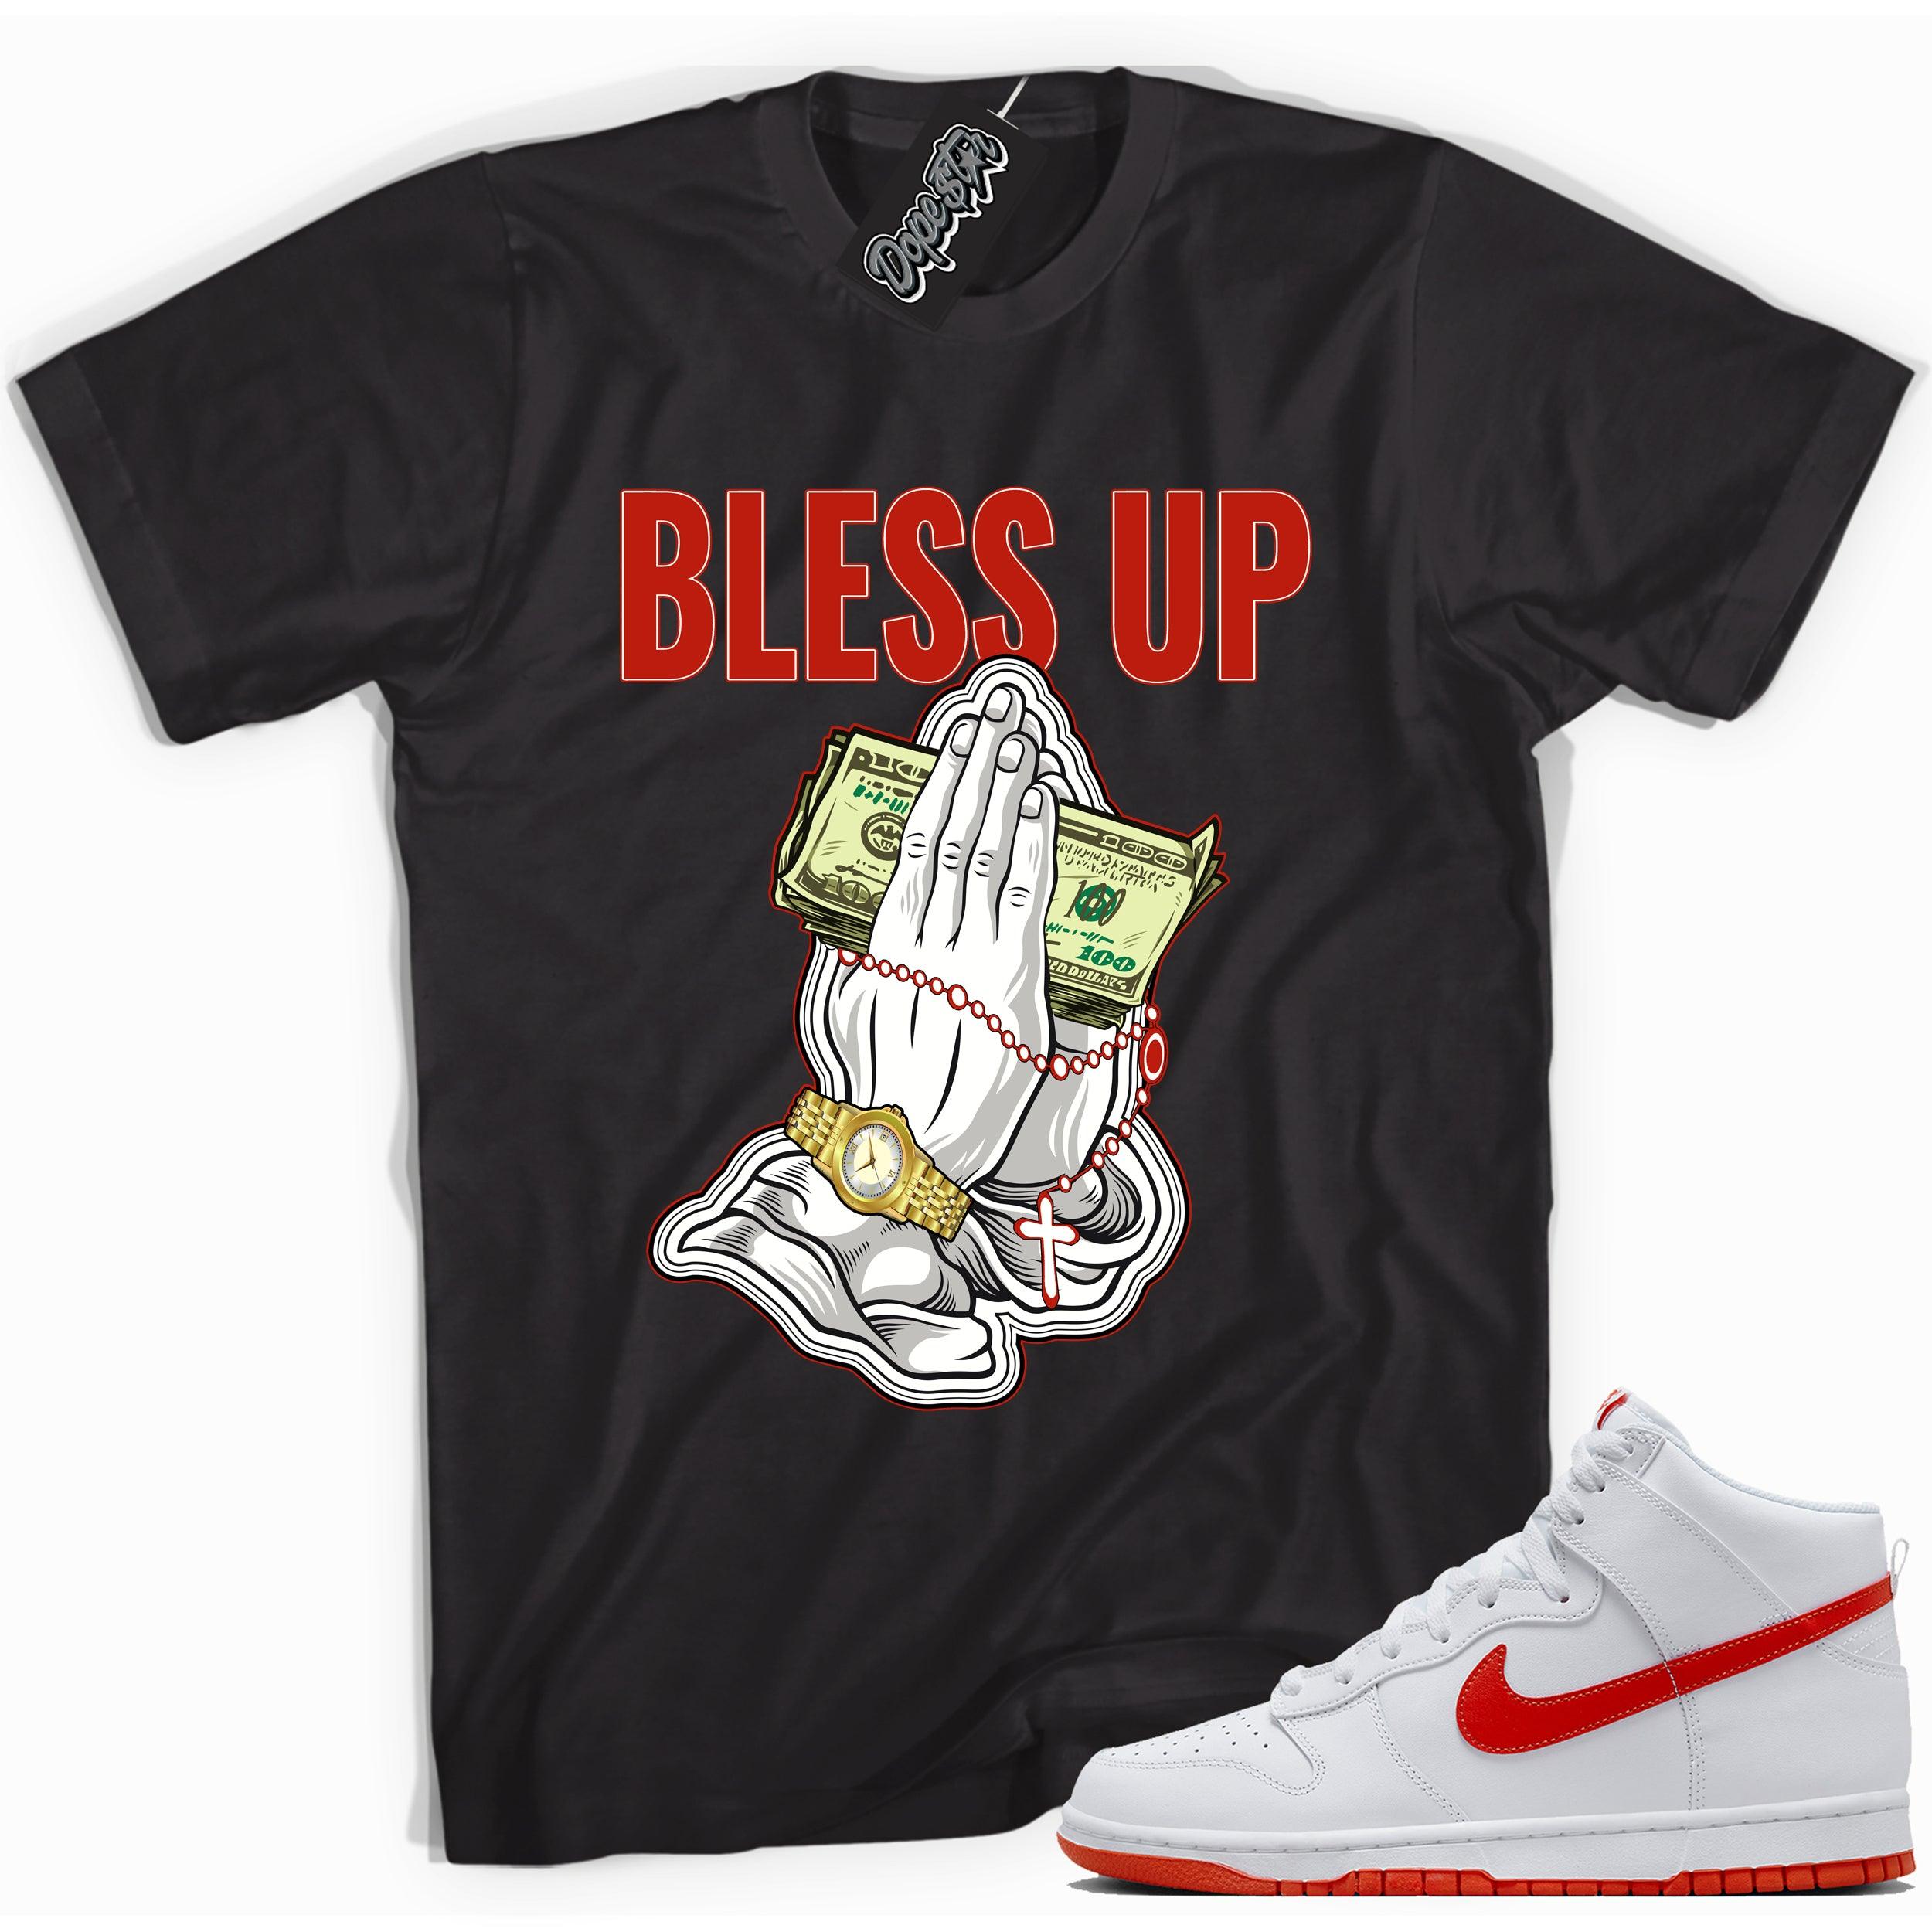 Cool black graphic tee with 'bless up praying hands' print, that perfectly matches Nike Dunk High White Picante Red sneakers.